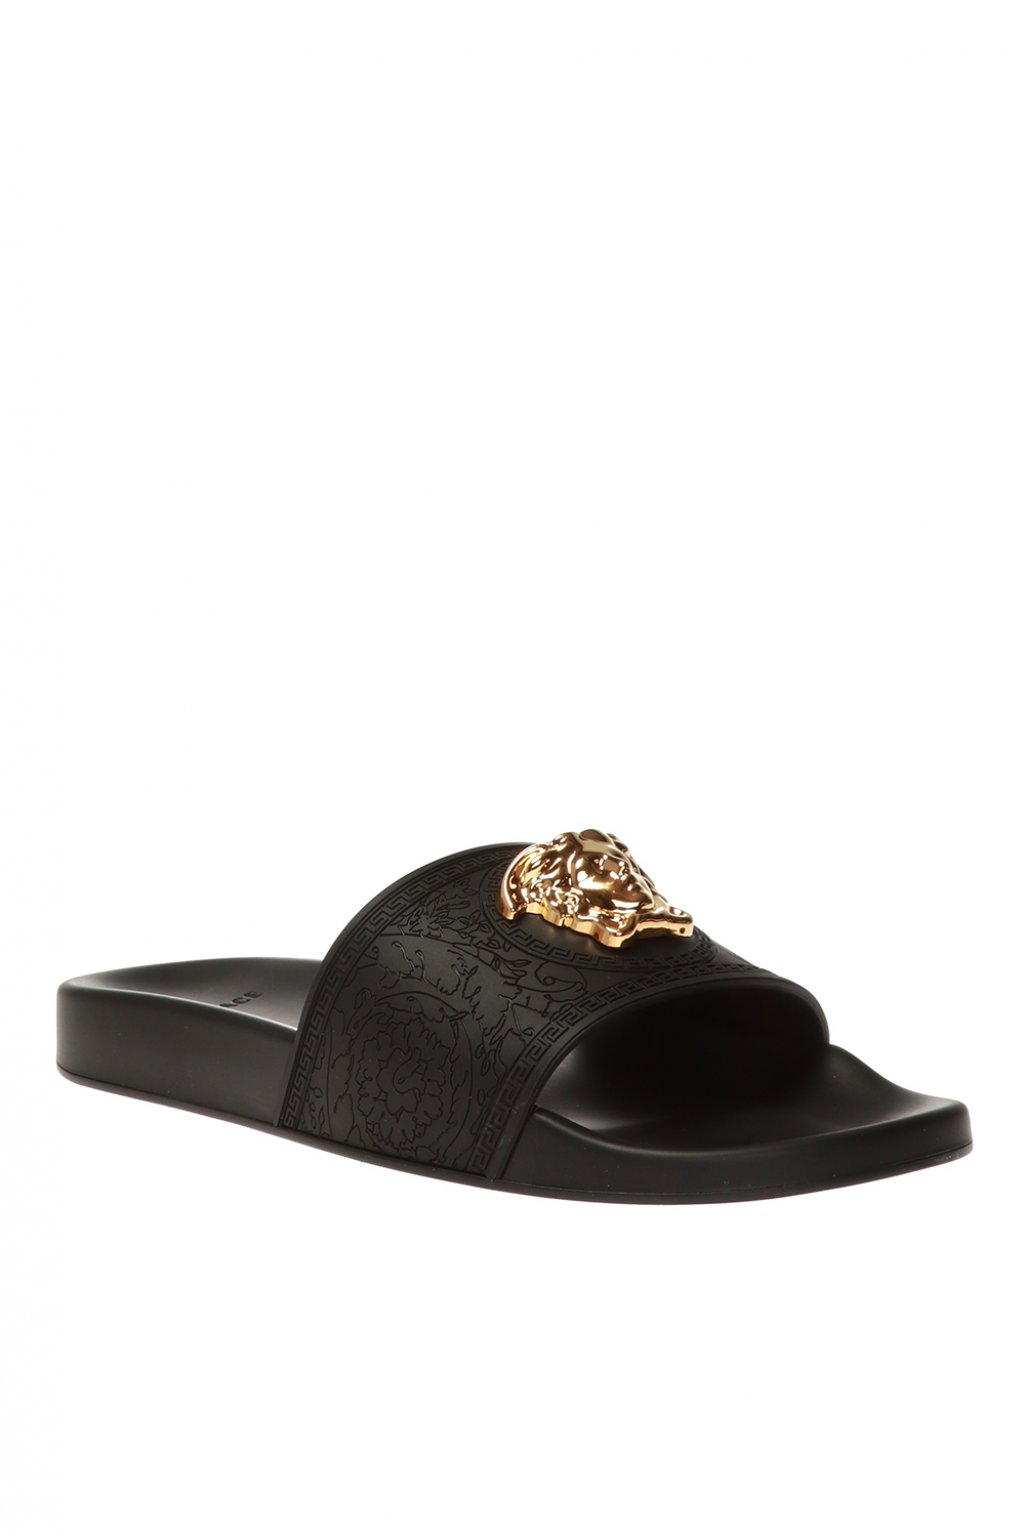 white and gold versace slides